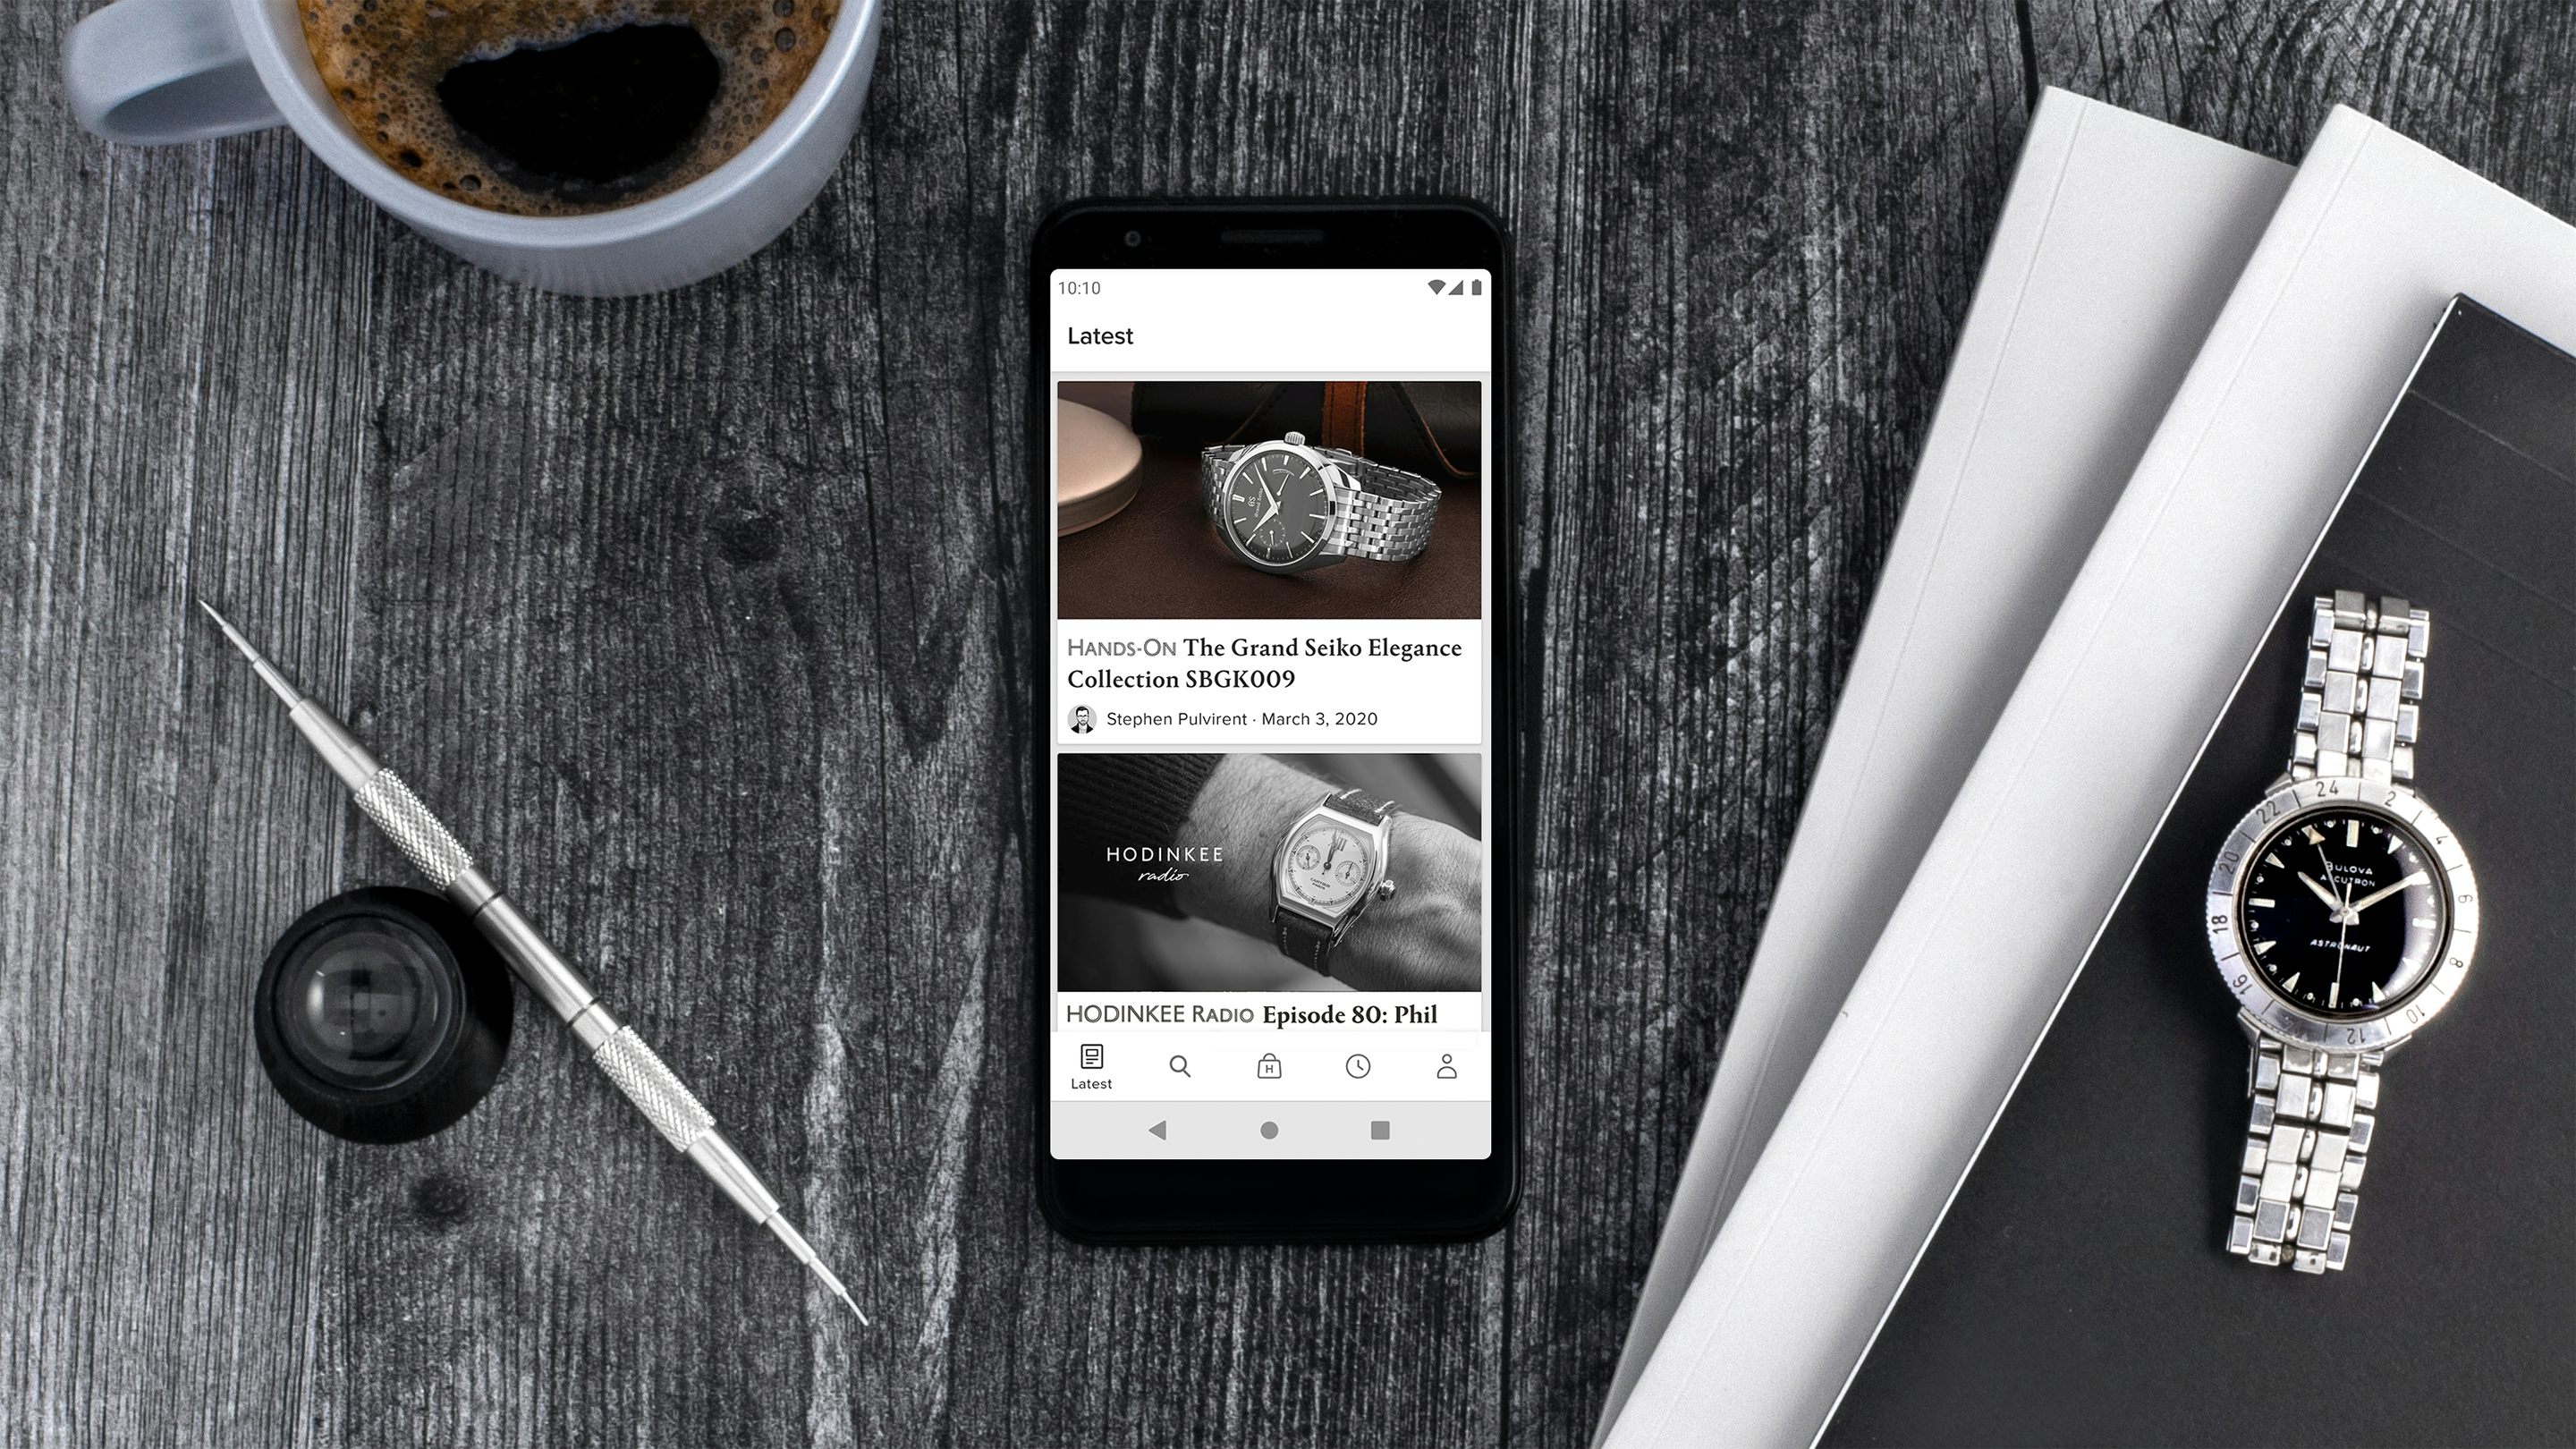 Introducing: The HODINKEE App For Android - Hodinkee